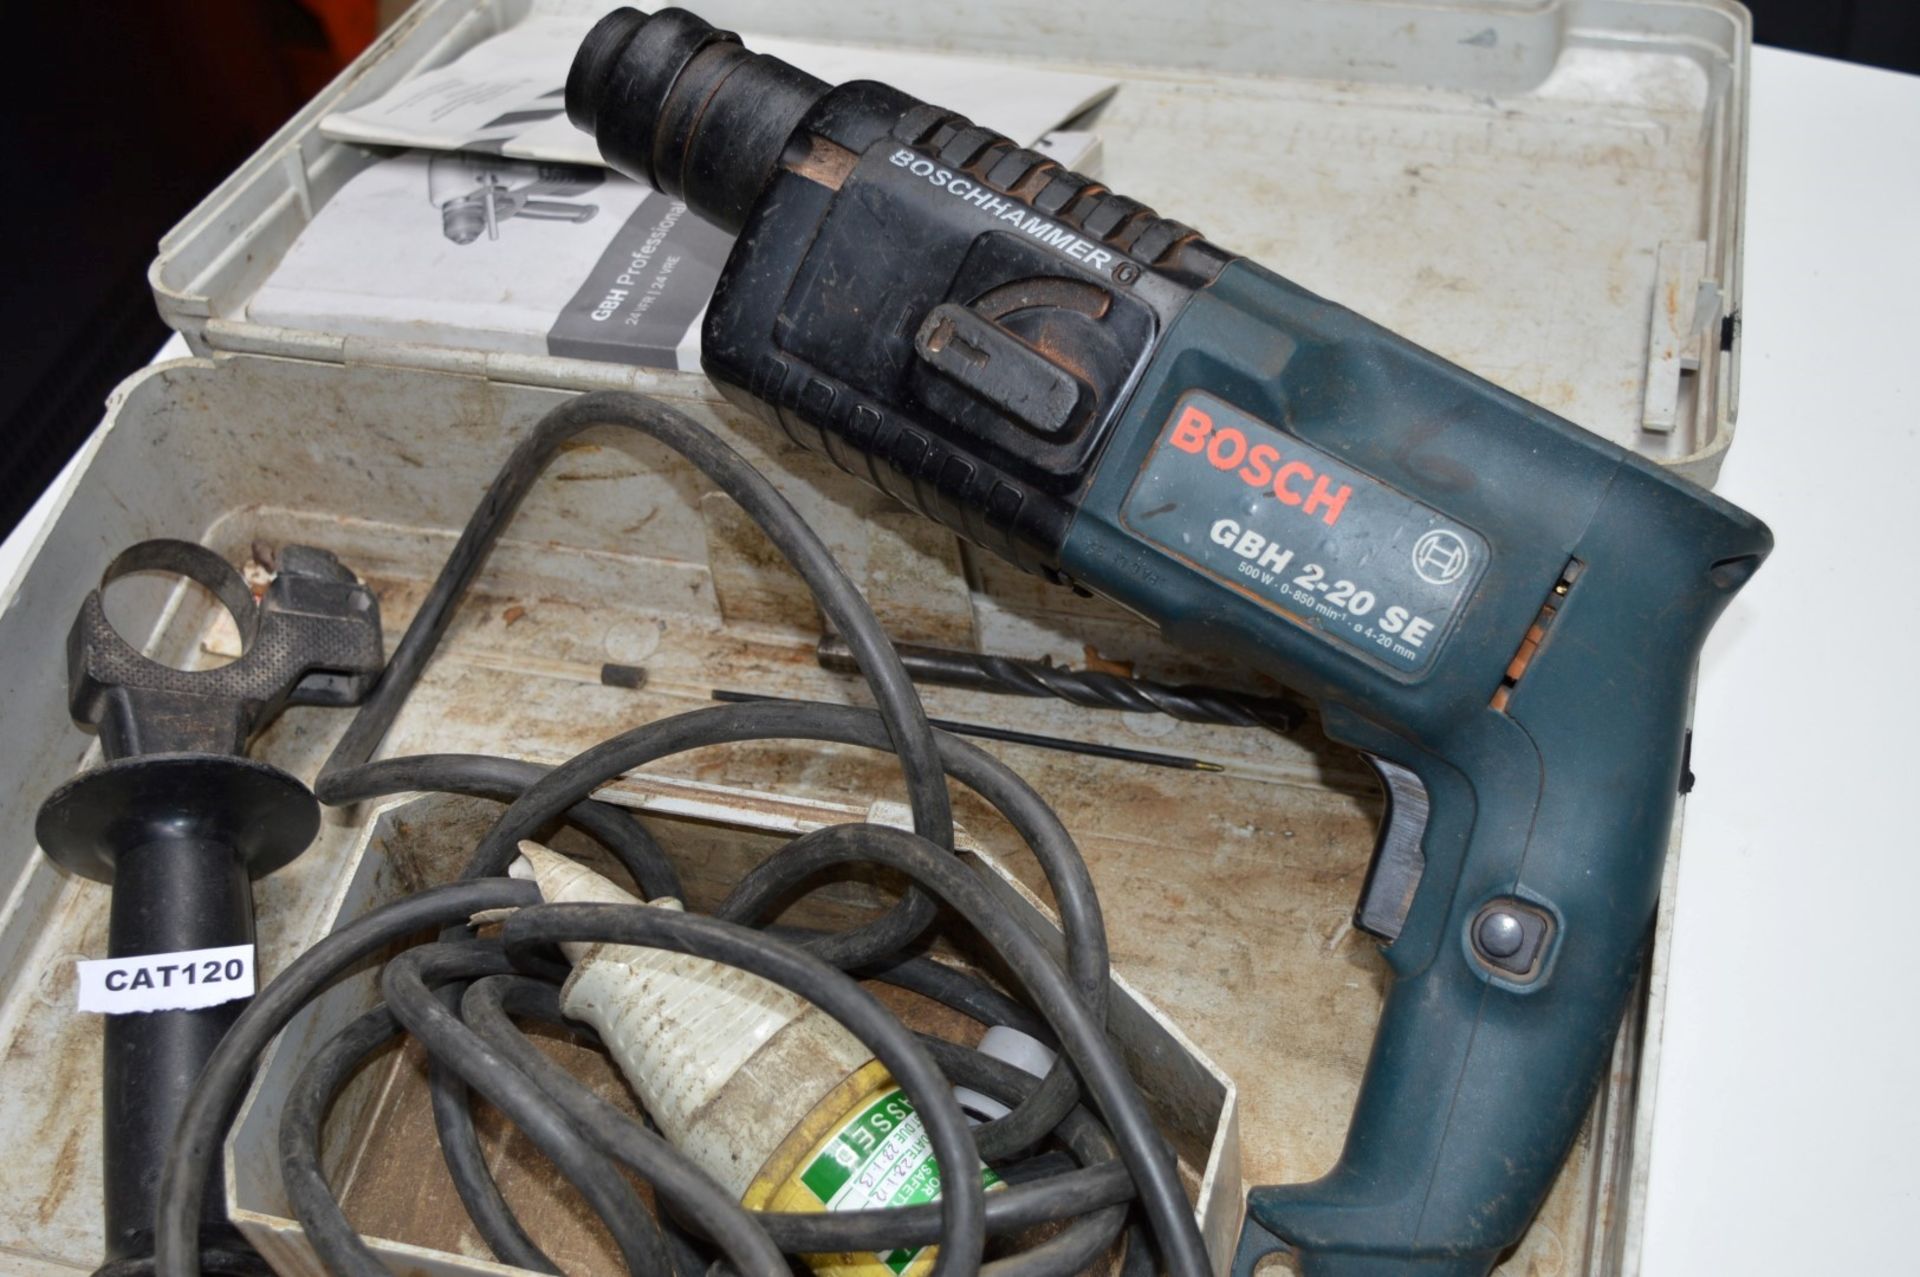 1 x Bosch Rotary Hammer Drill - 110v - Model GBH 2 SE - Includes Protective Case - Tested and - Image 4 of 5